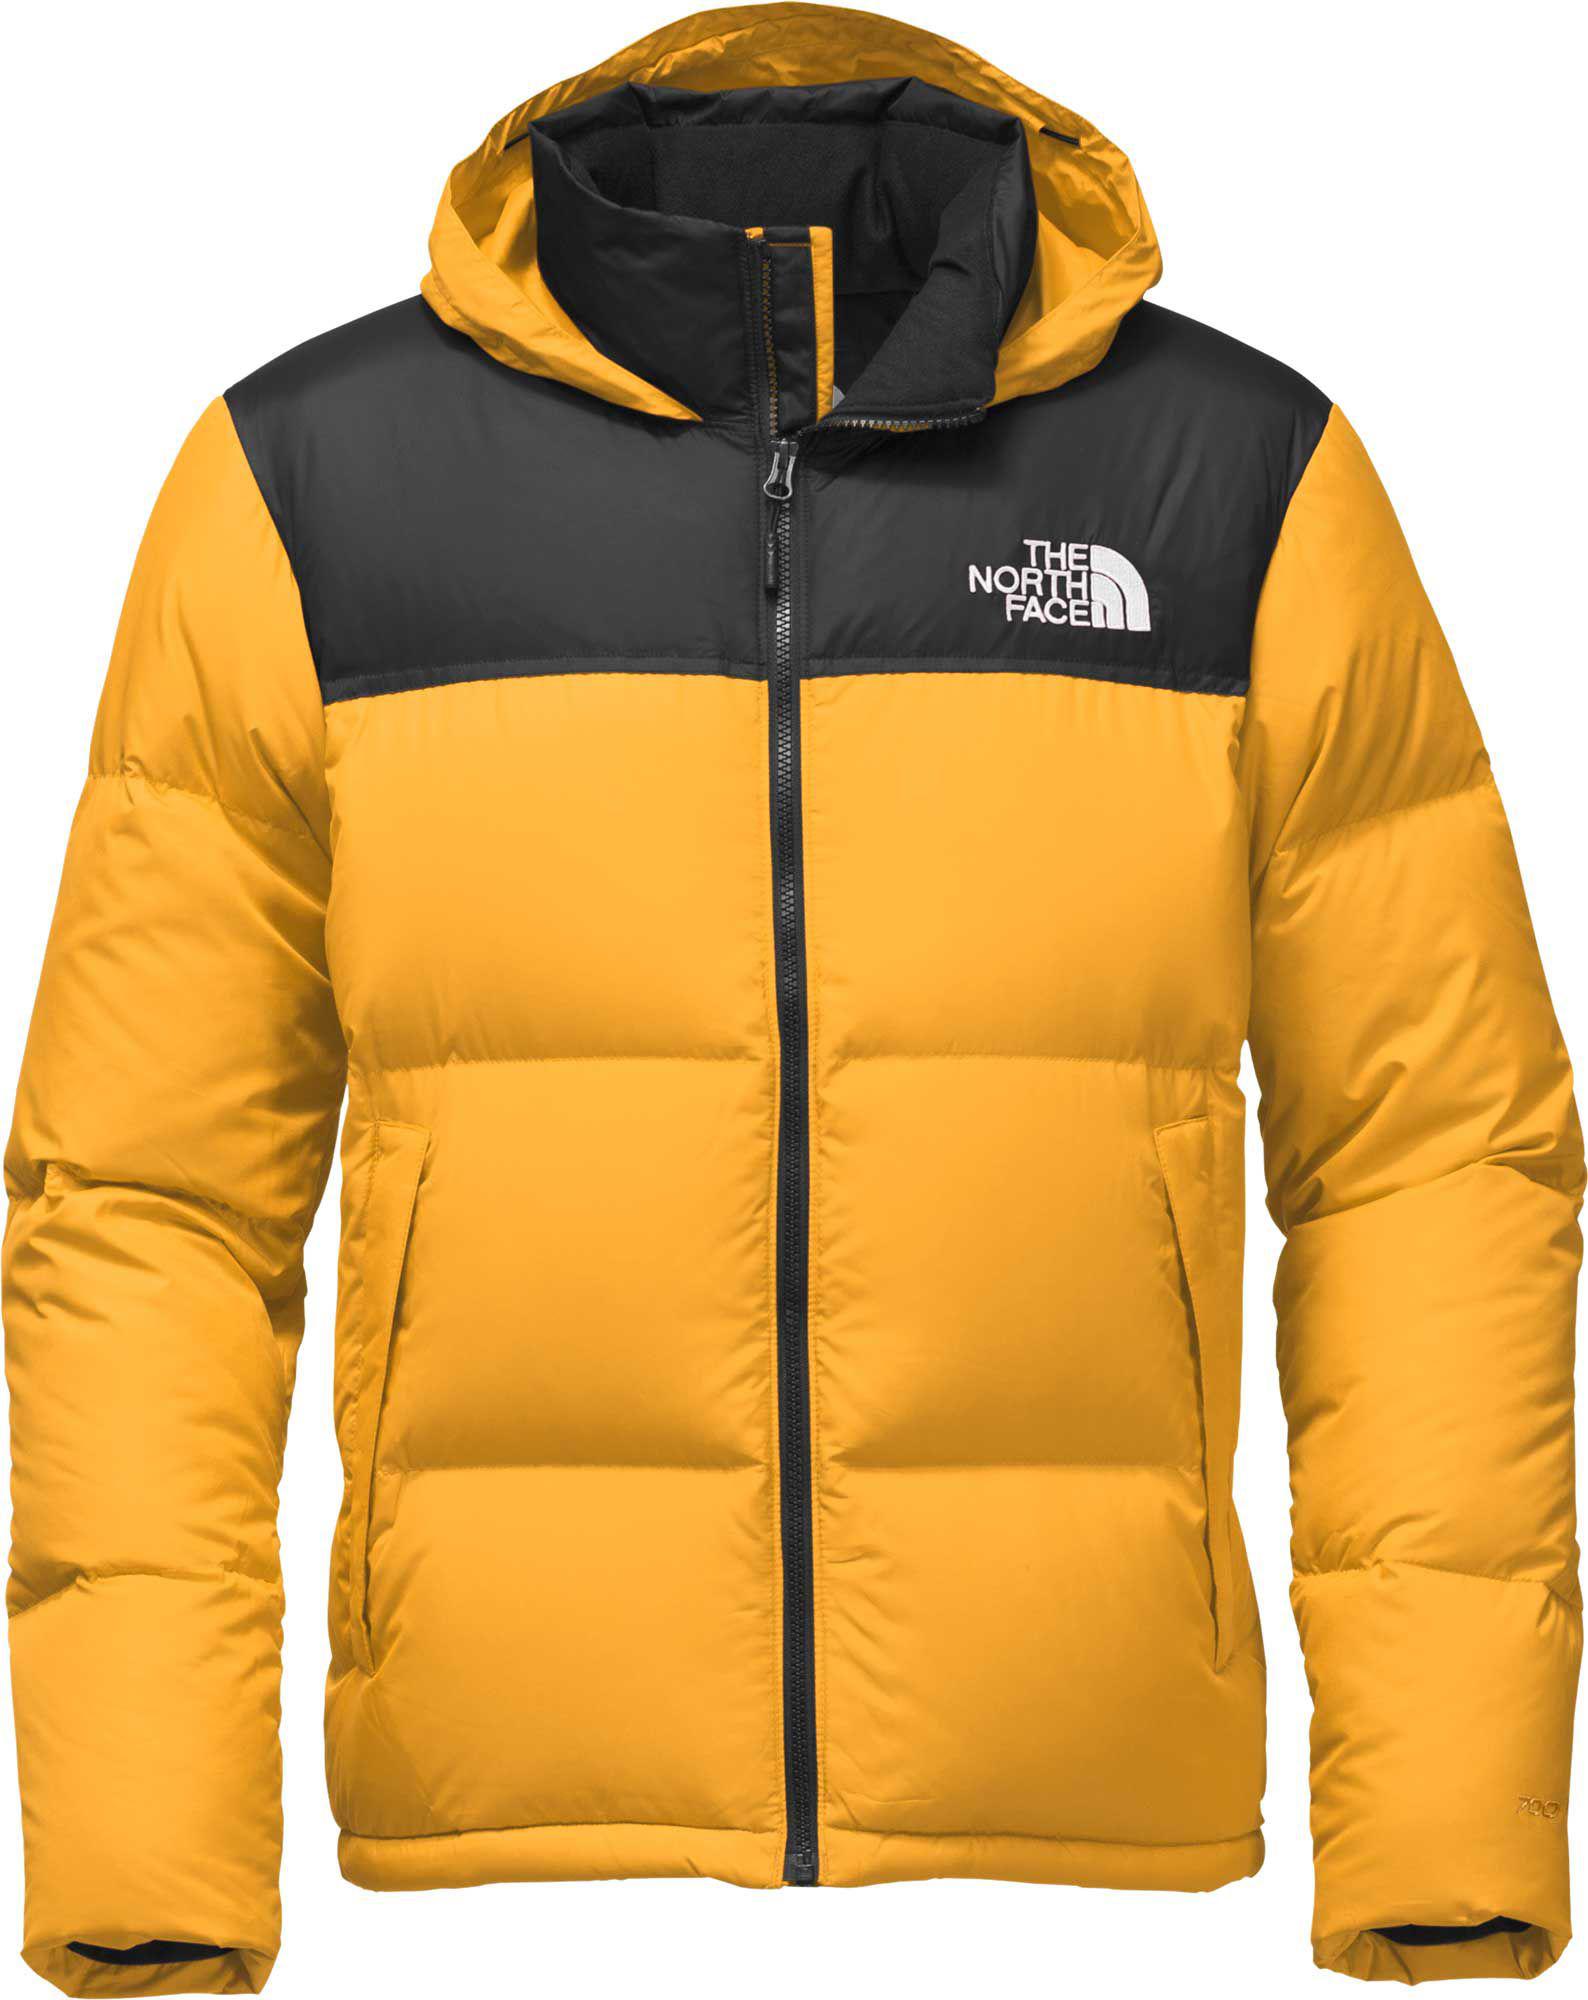 The North Face Novelty Nuptse Down Jacket in Yellow for Men - Lyst